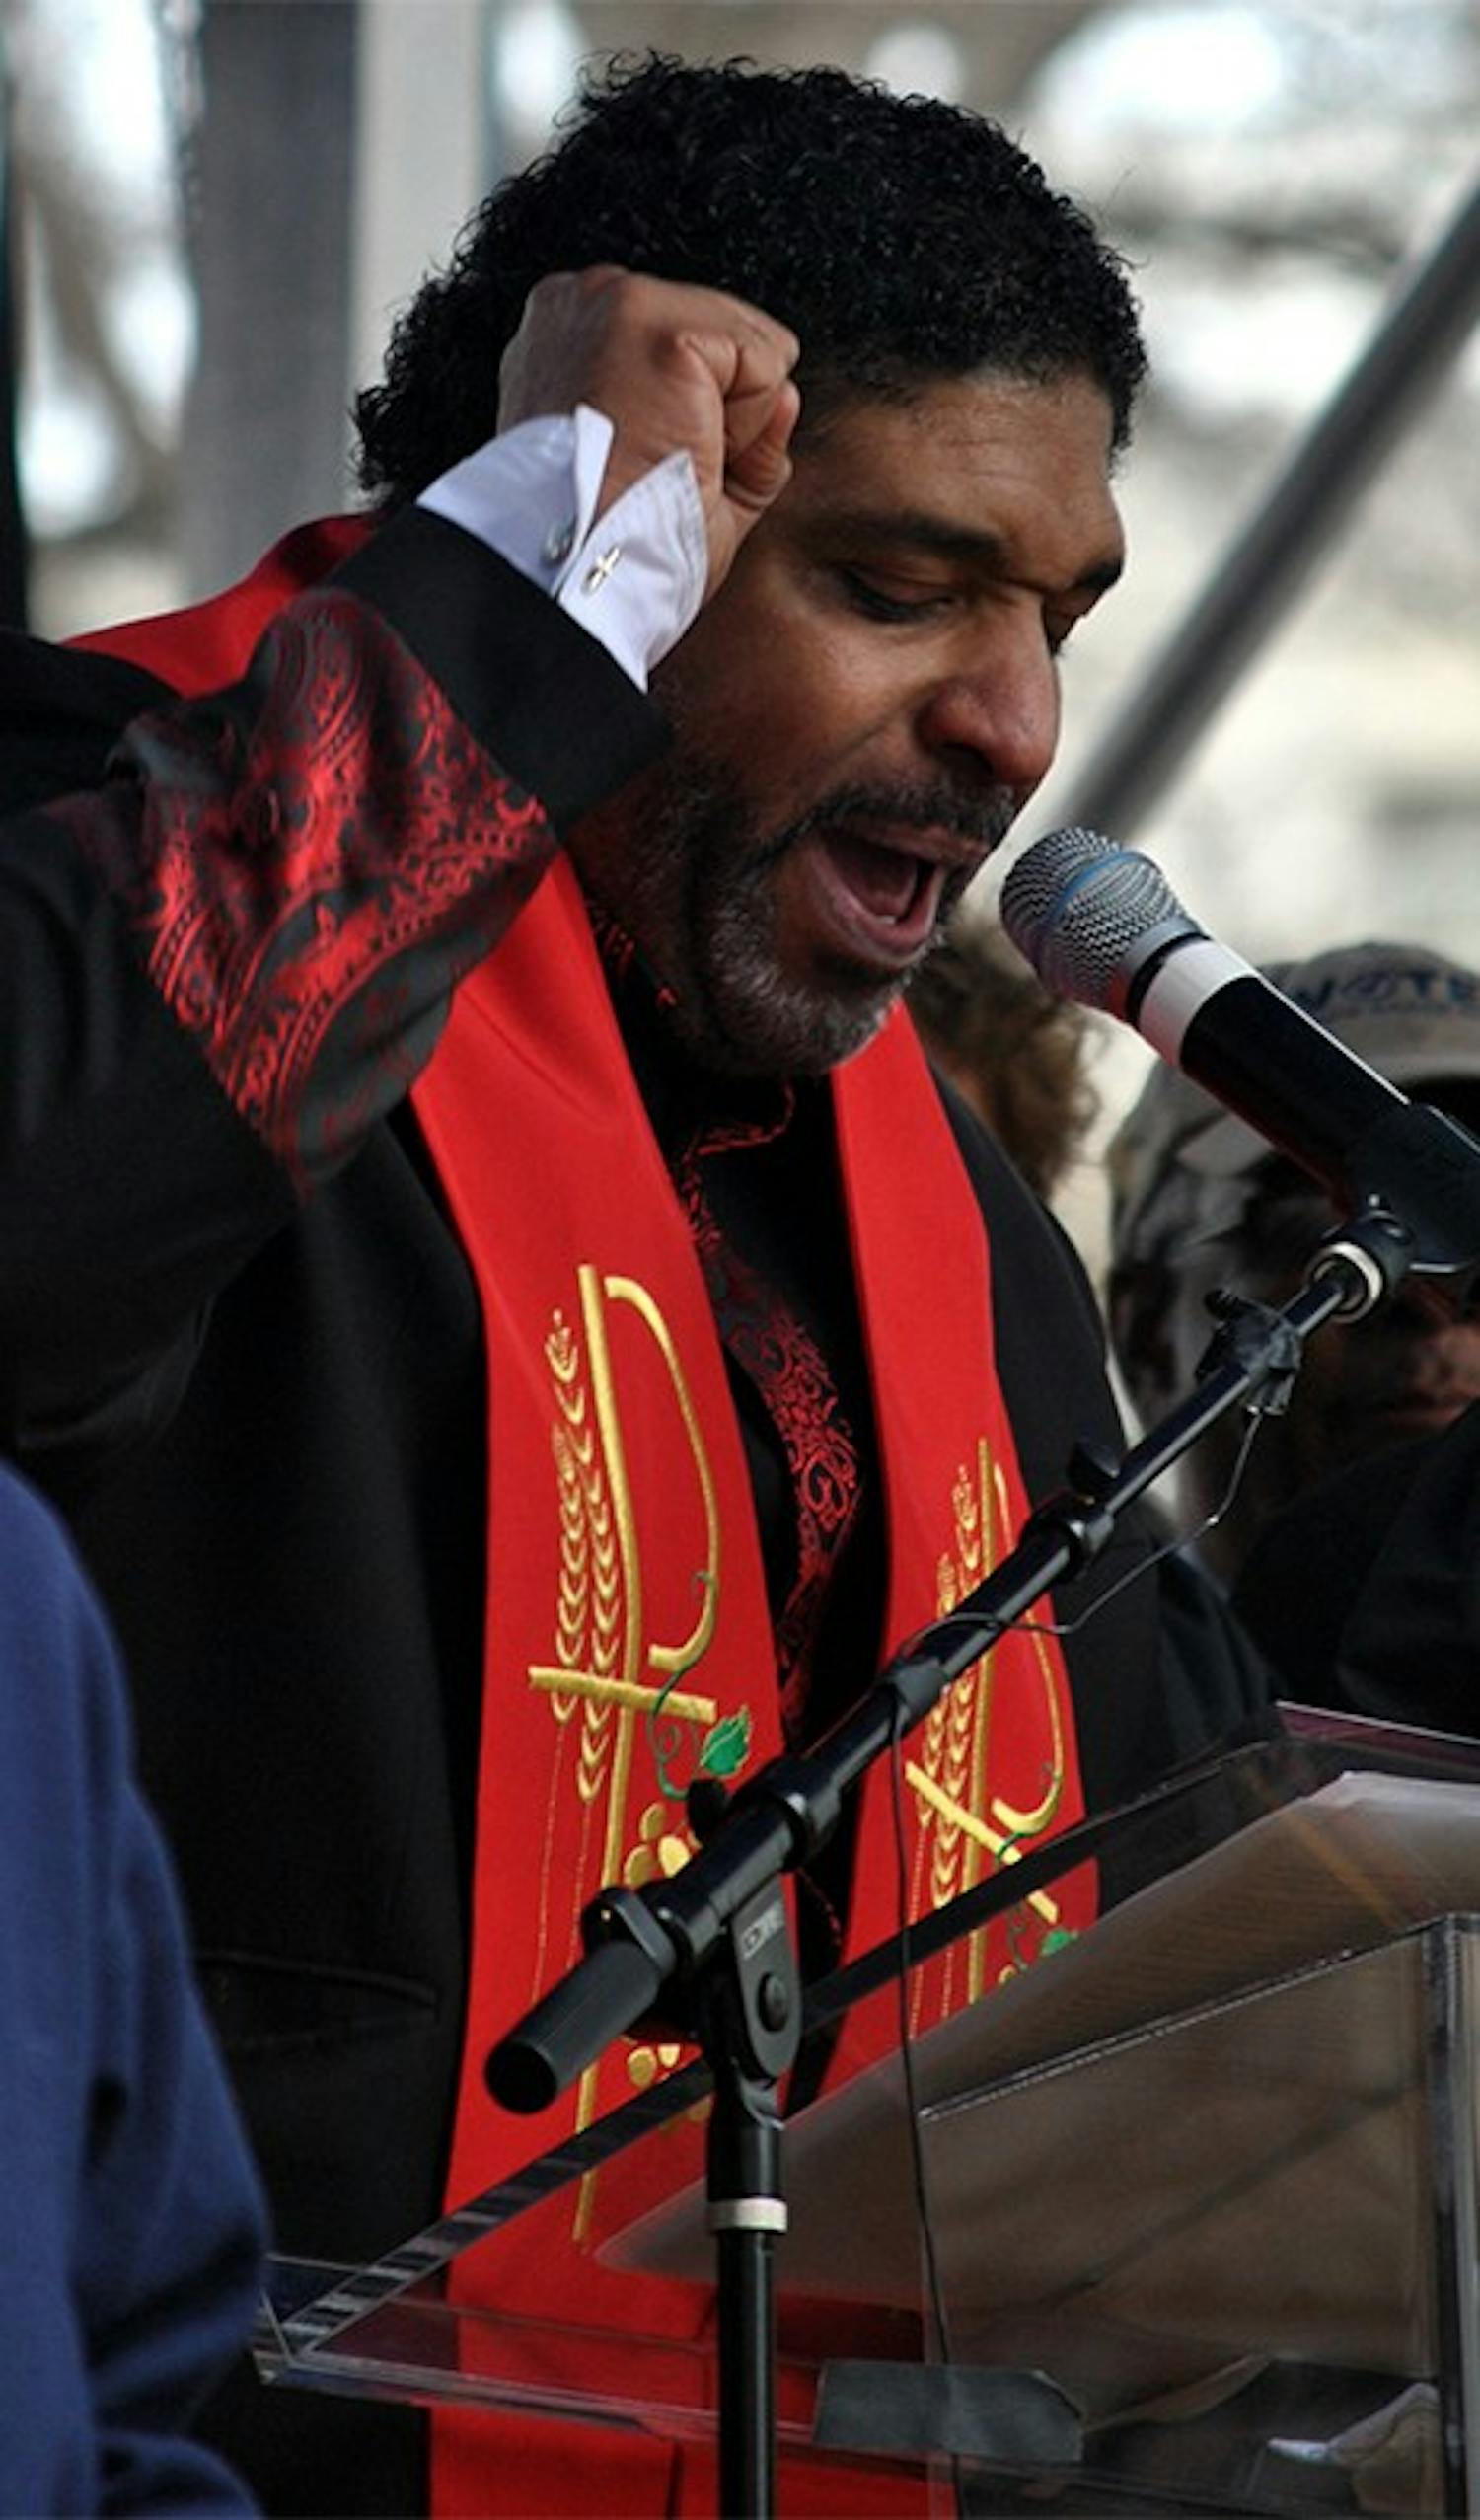 	N.C. NAACP President Rev. William Barber II addressed thousands of onlookers at the Moral March.